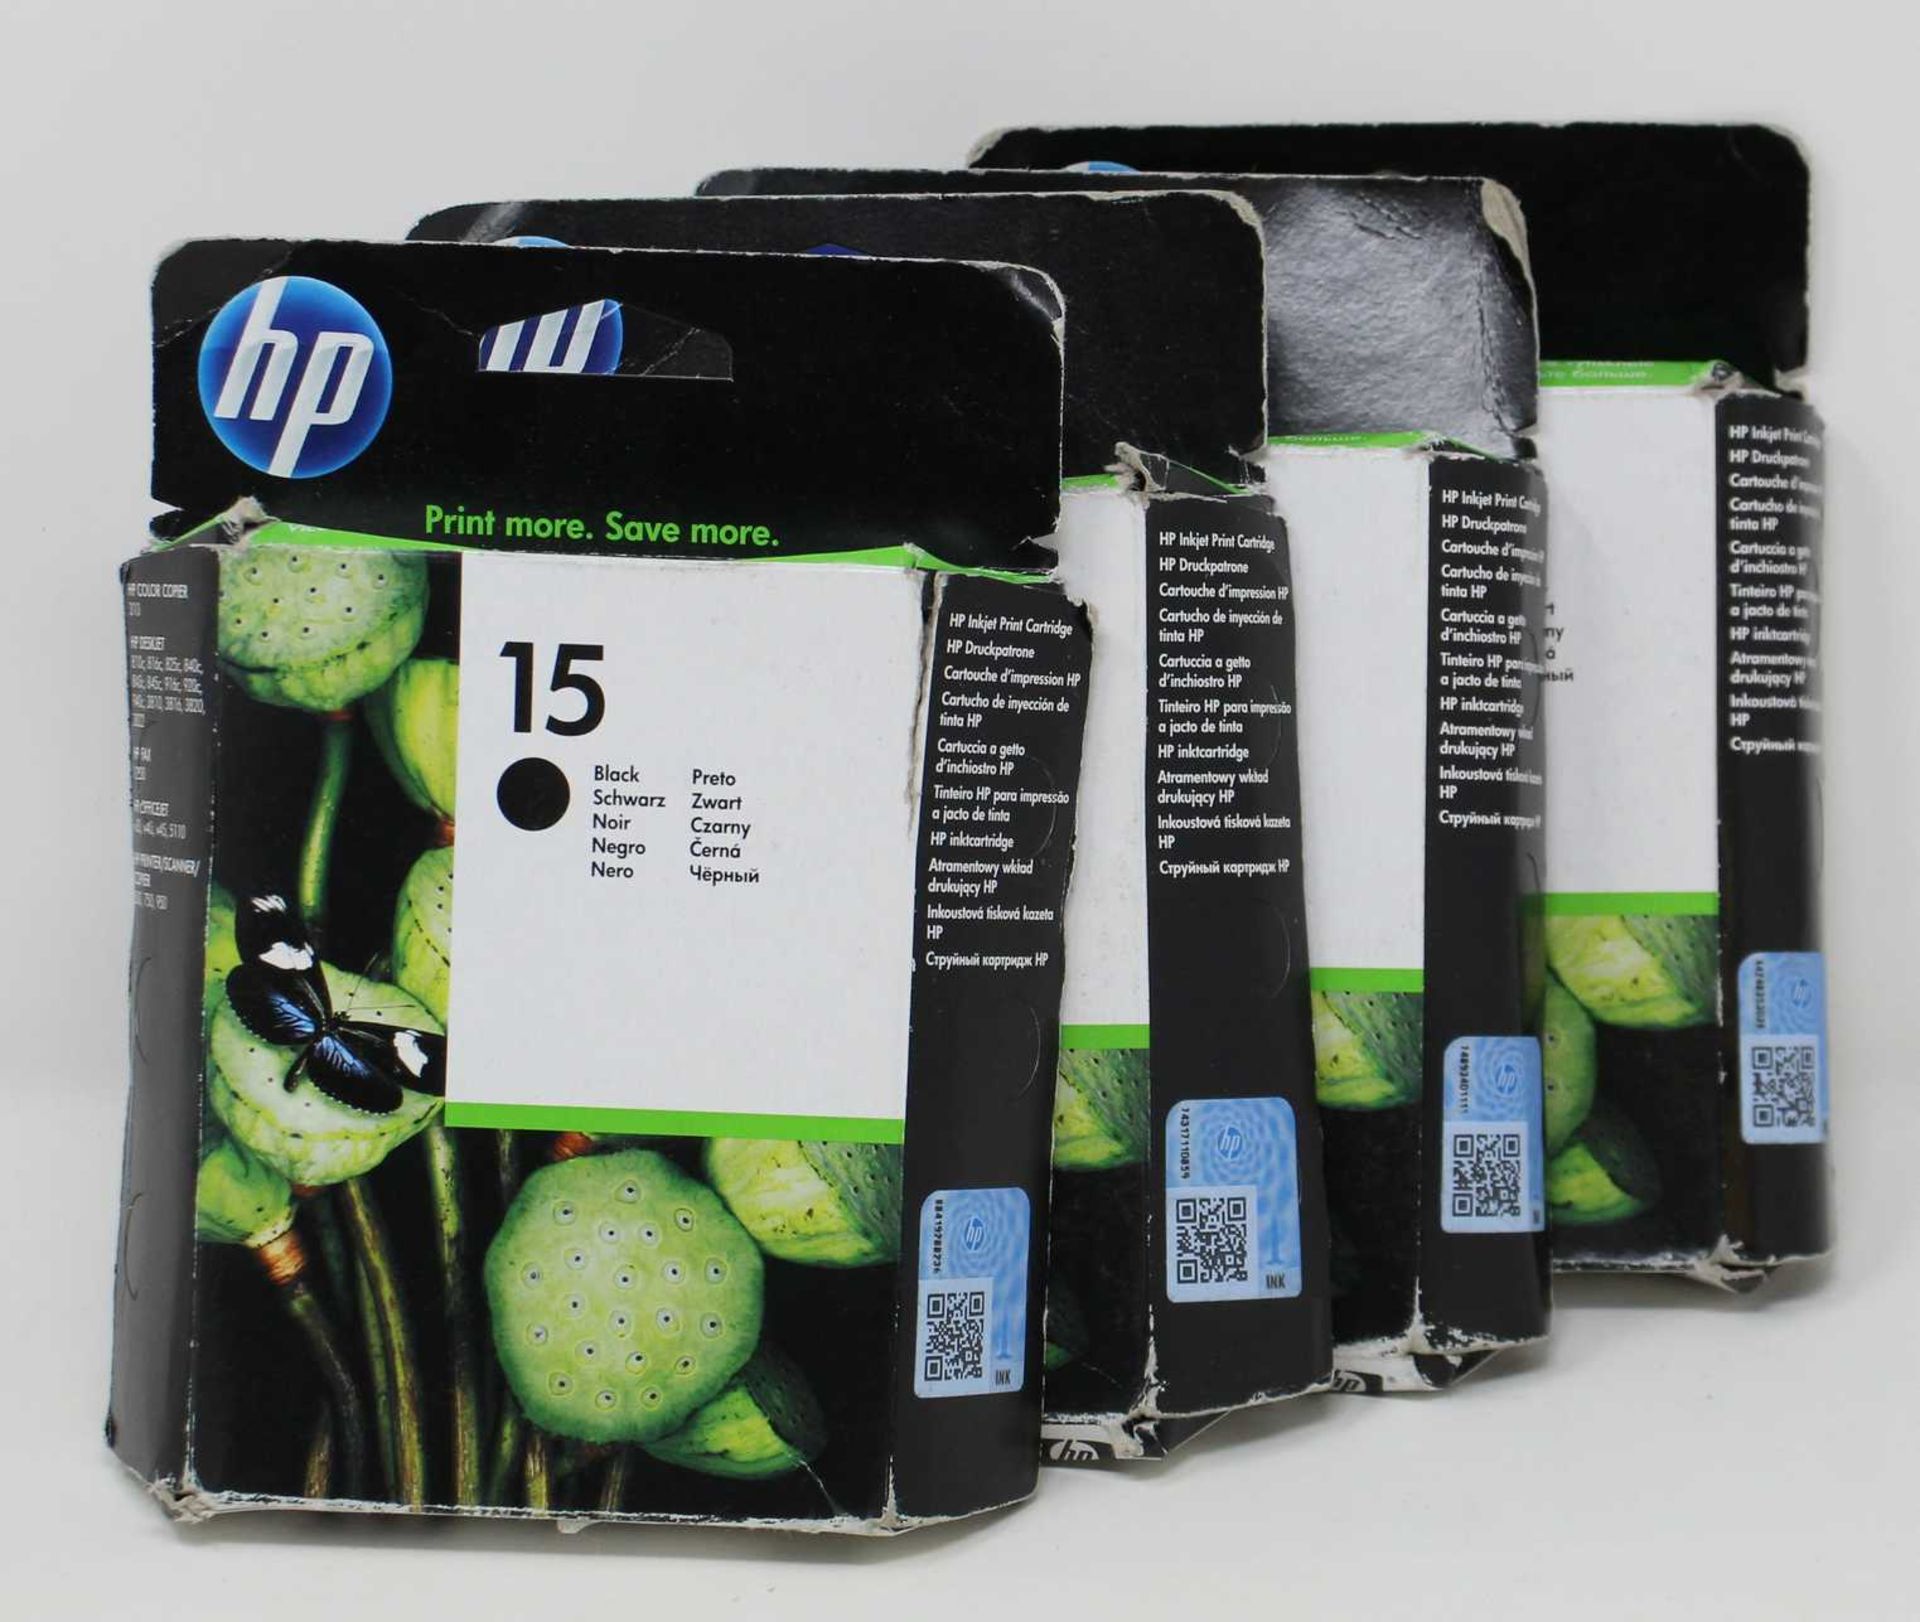 Four boxed as new HP 15 Black Ink Cartridges (P/N: C6615DE) (Boxes sealed, some damage to boxes).